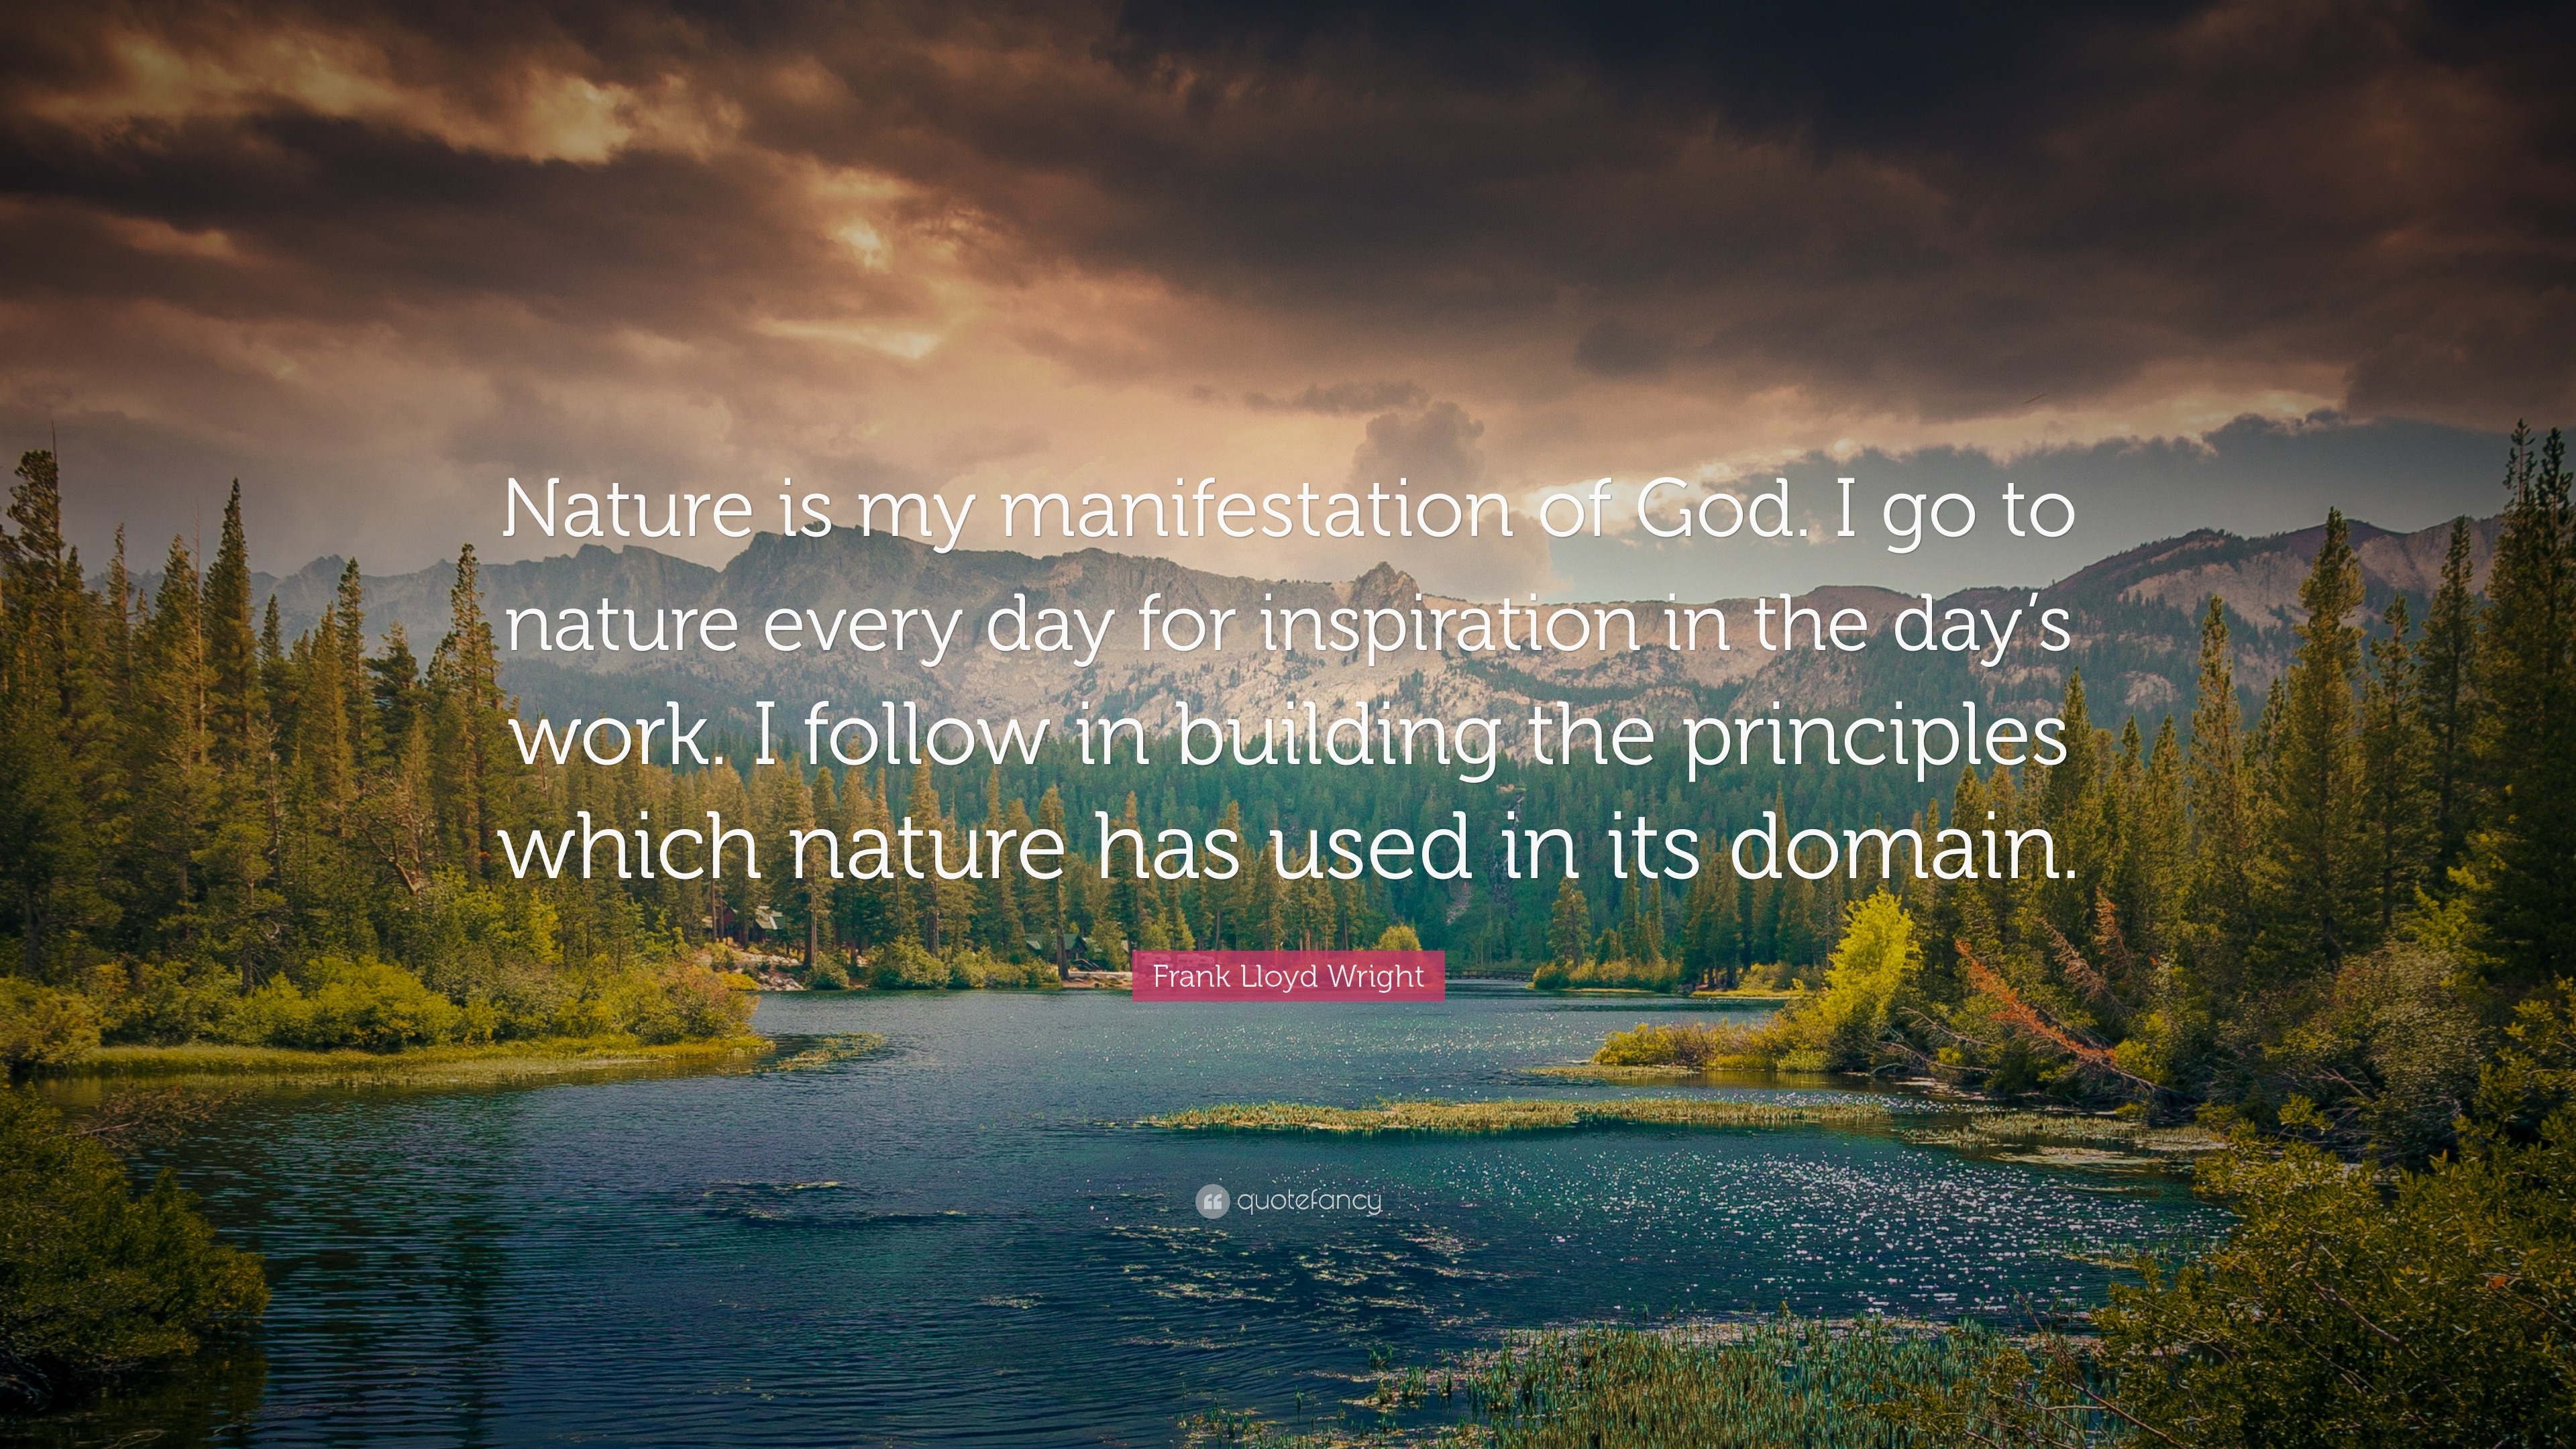 Frank Lloyd Wright Quote: "Nature is my manifestation of God. I go to ...